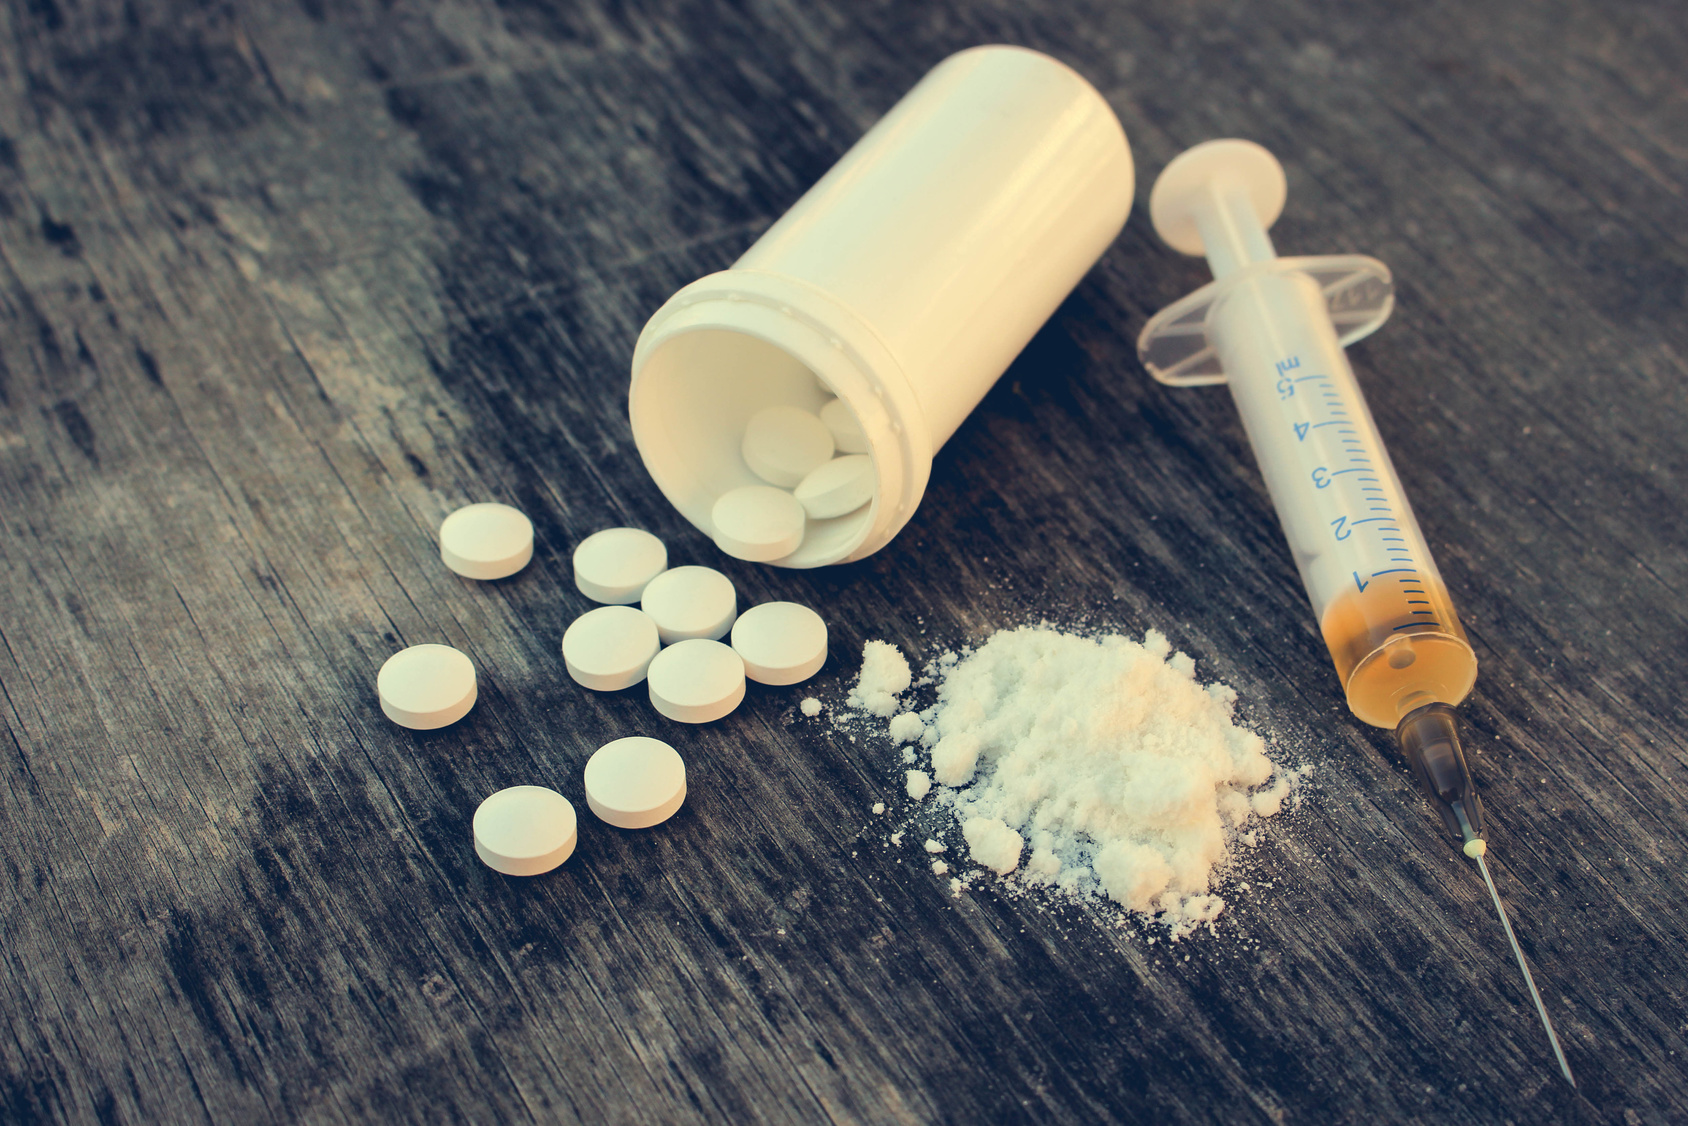 The Role of the Nurse in Preventing Opioid Abuse